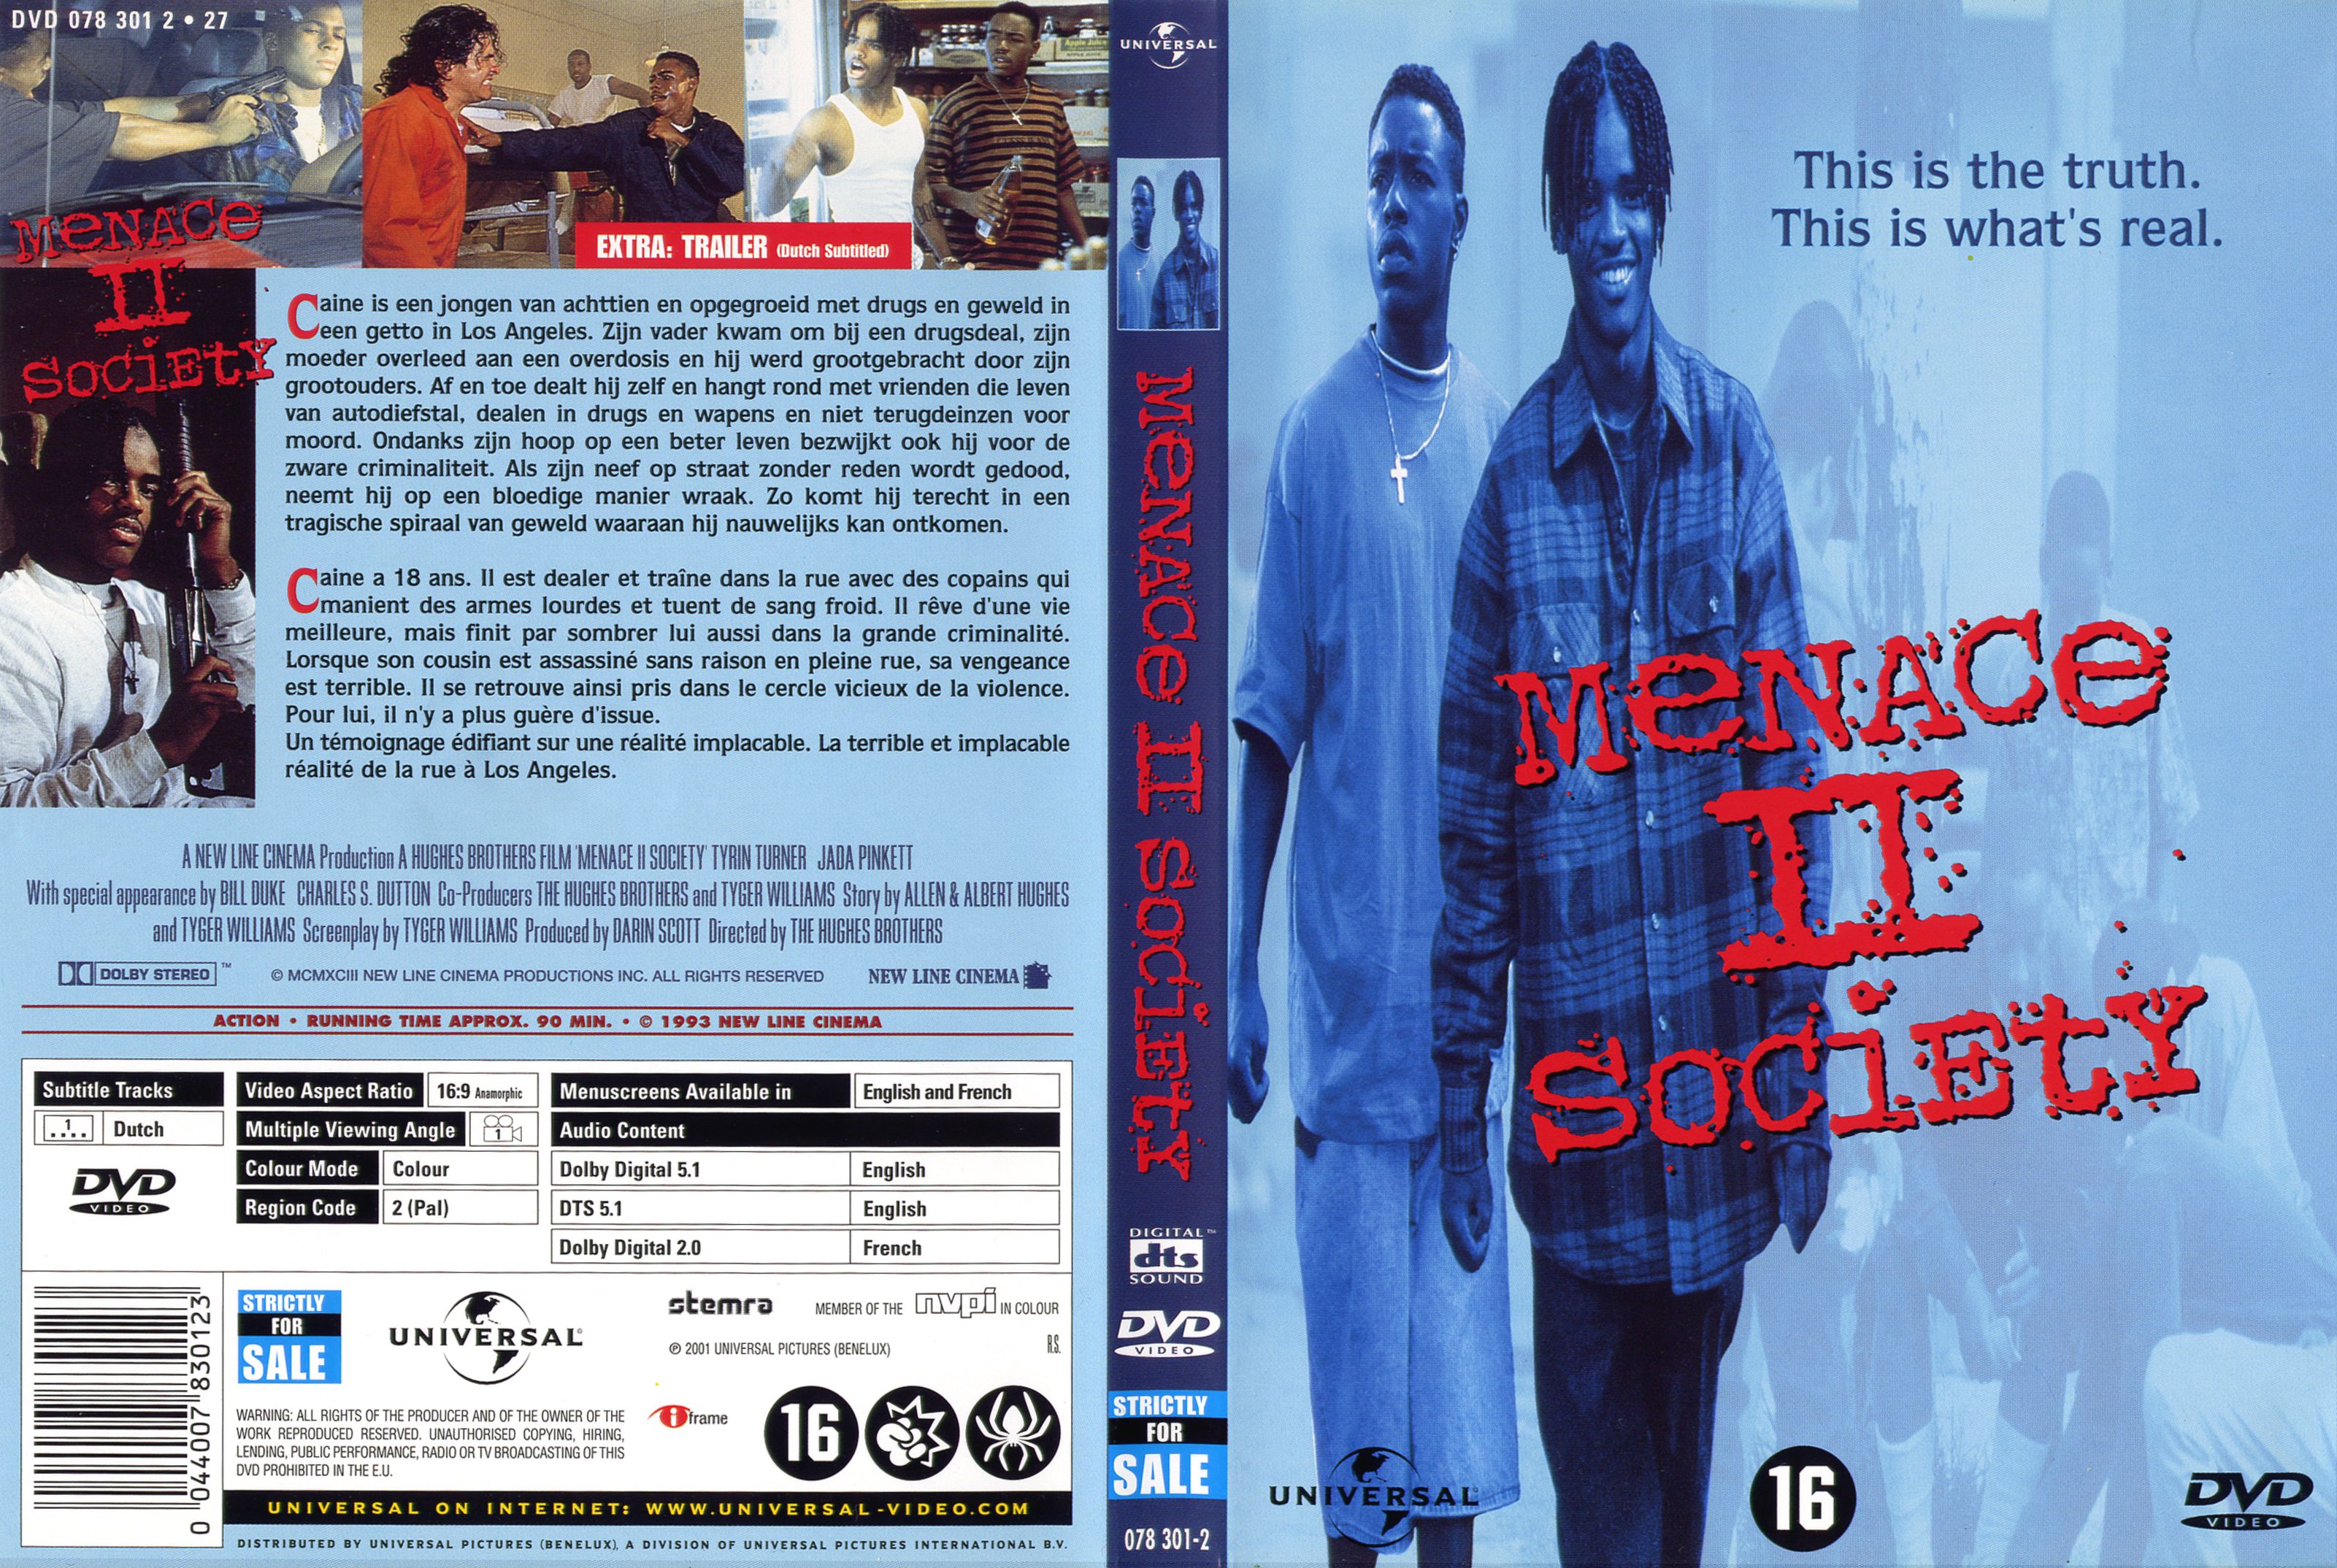 Jaquette DVD Menace ii society